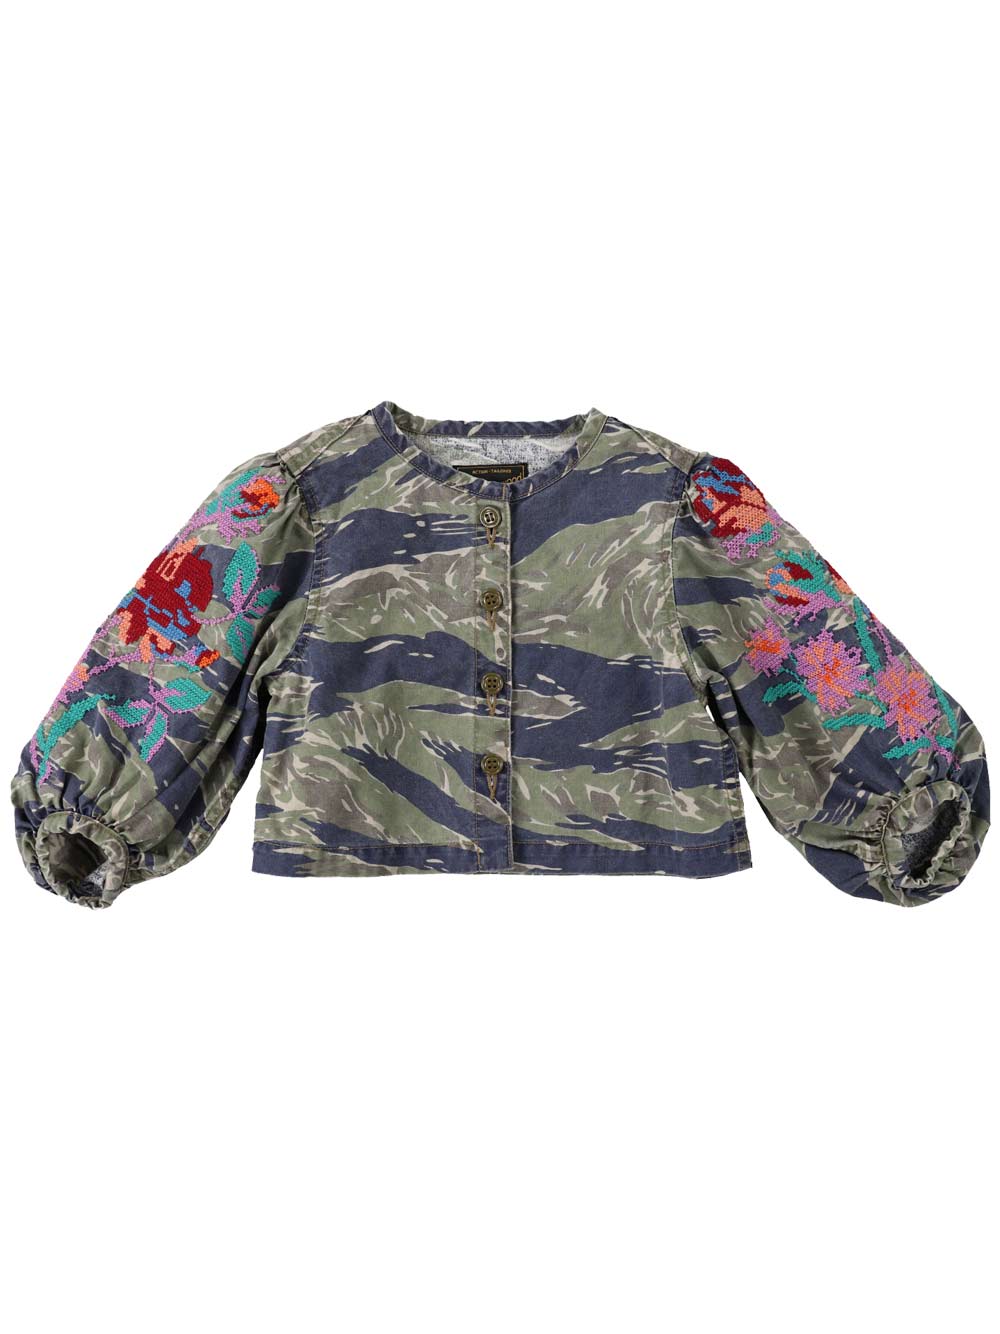 PREORDER: Camouflage Jacket